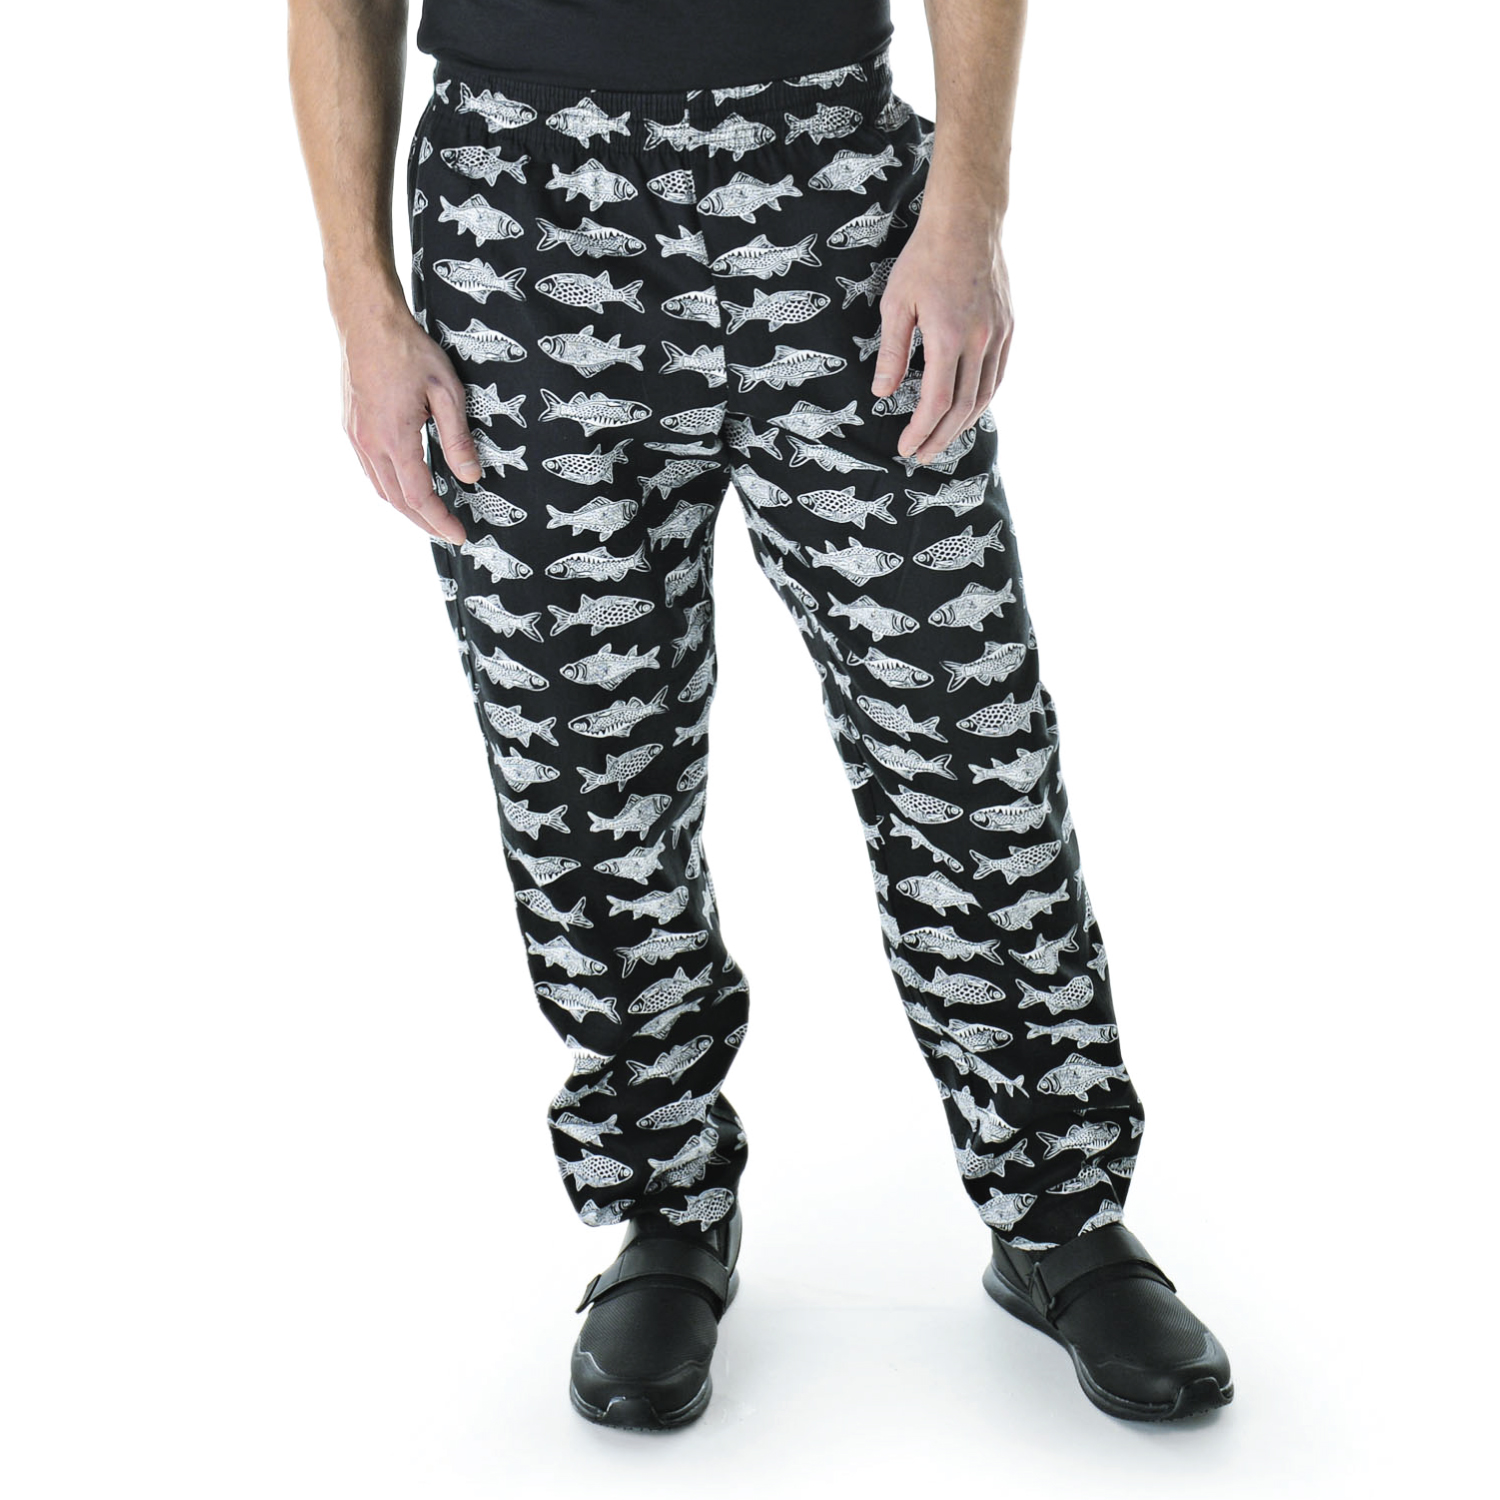 New Black White Checkered Traditional Chef Pants size 28,30,38,40,42,44,46,50 